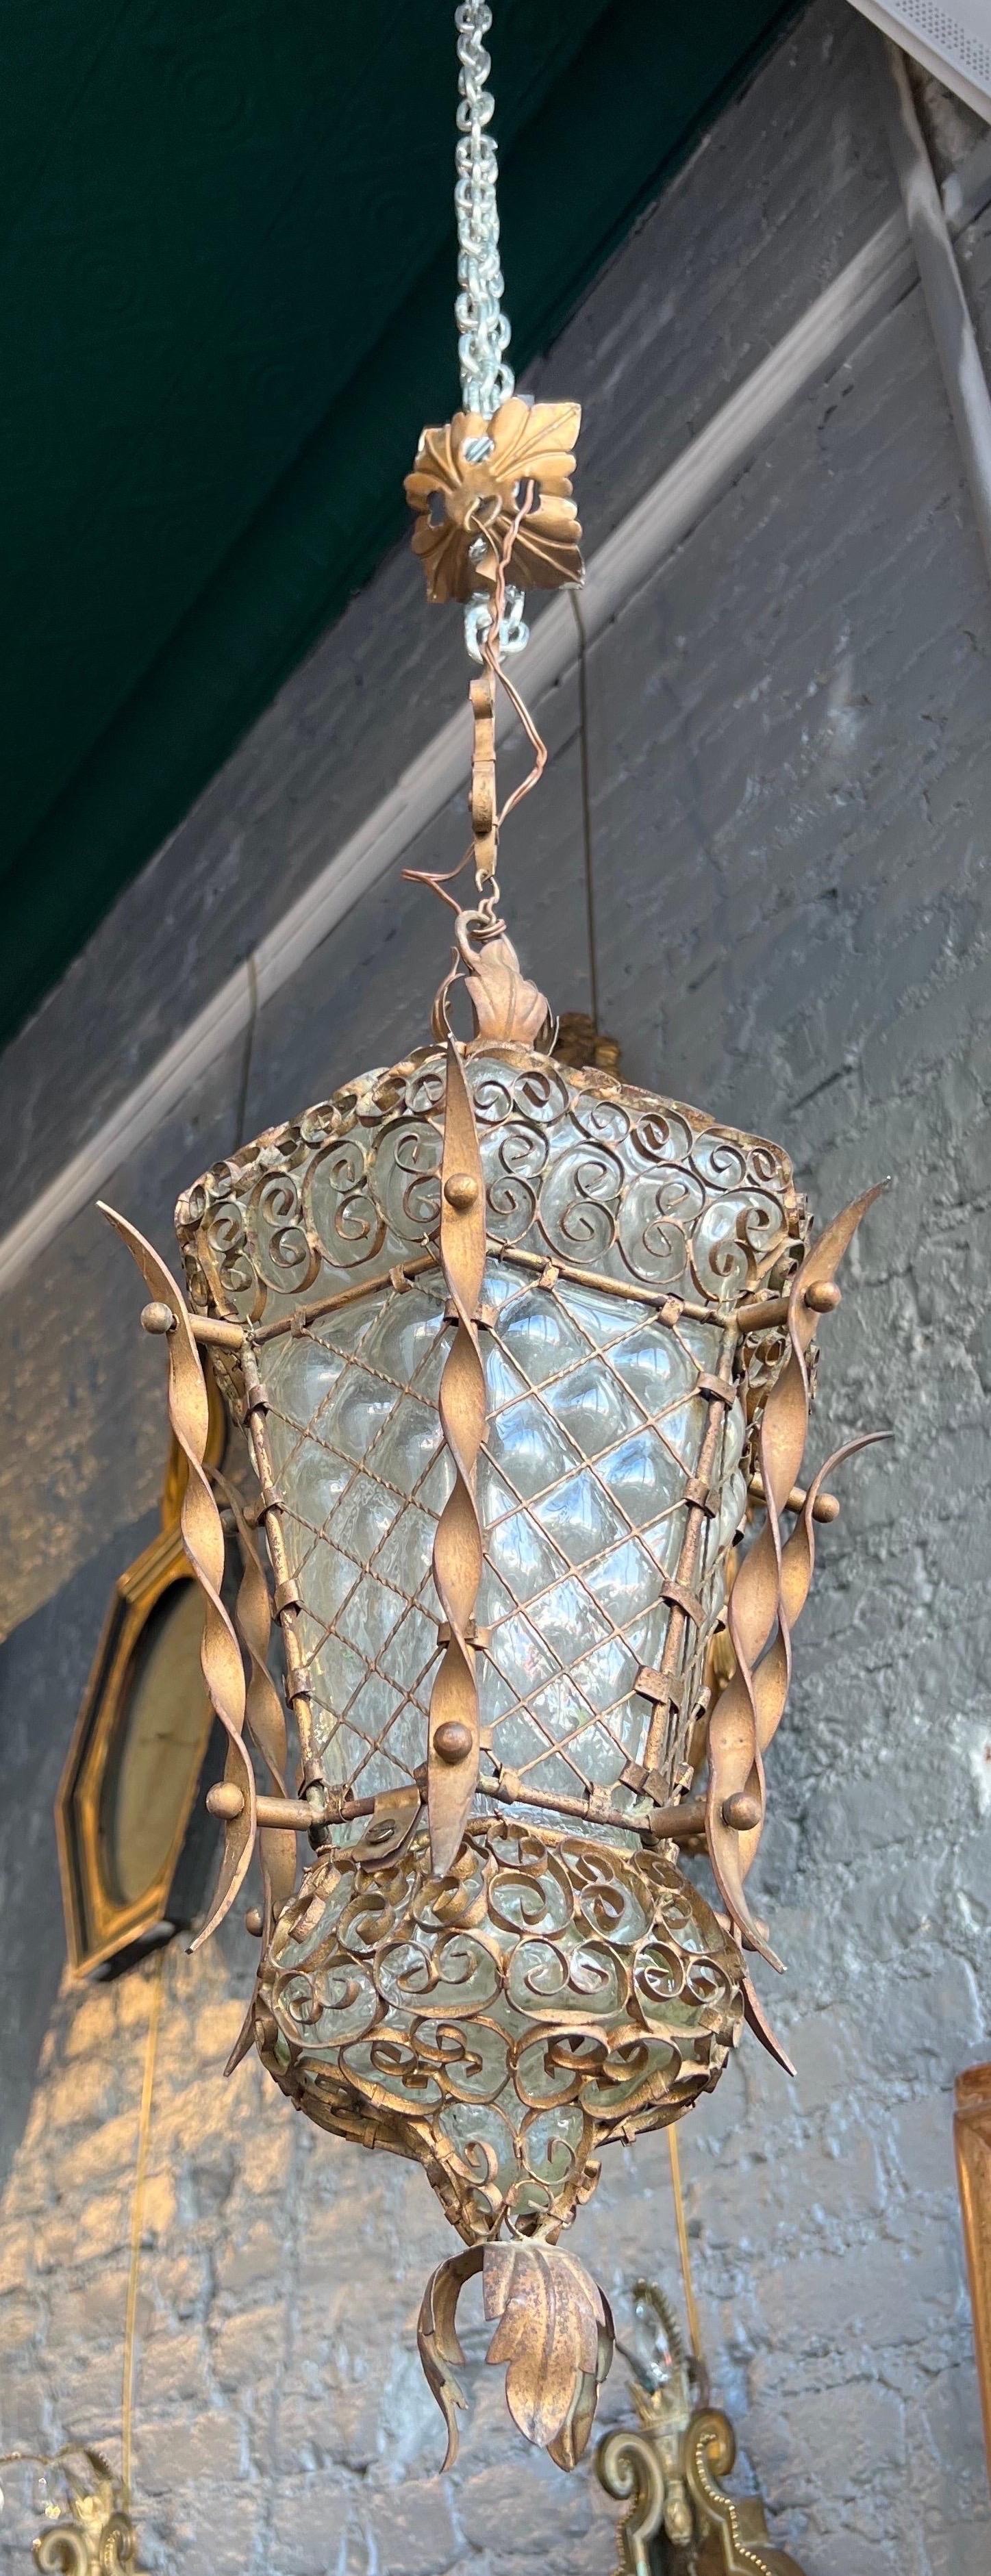 Great little Venetian blown glass and iron lantern dating from the end of the 19th century to the beginning of the 20th century. The ironwork is hand fit around the blown glass lantern. Recently rewired for electricity. Would be wonderful in a